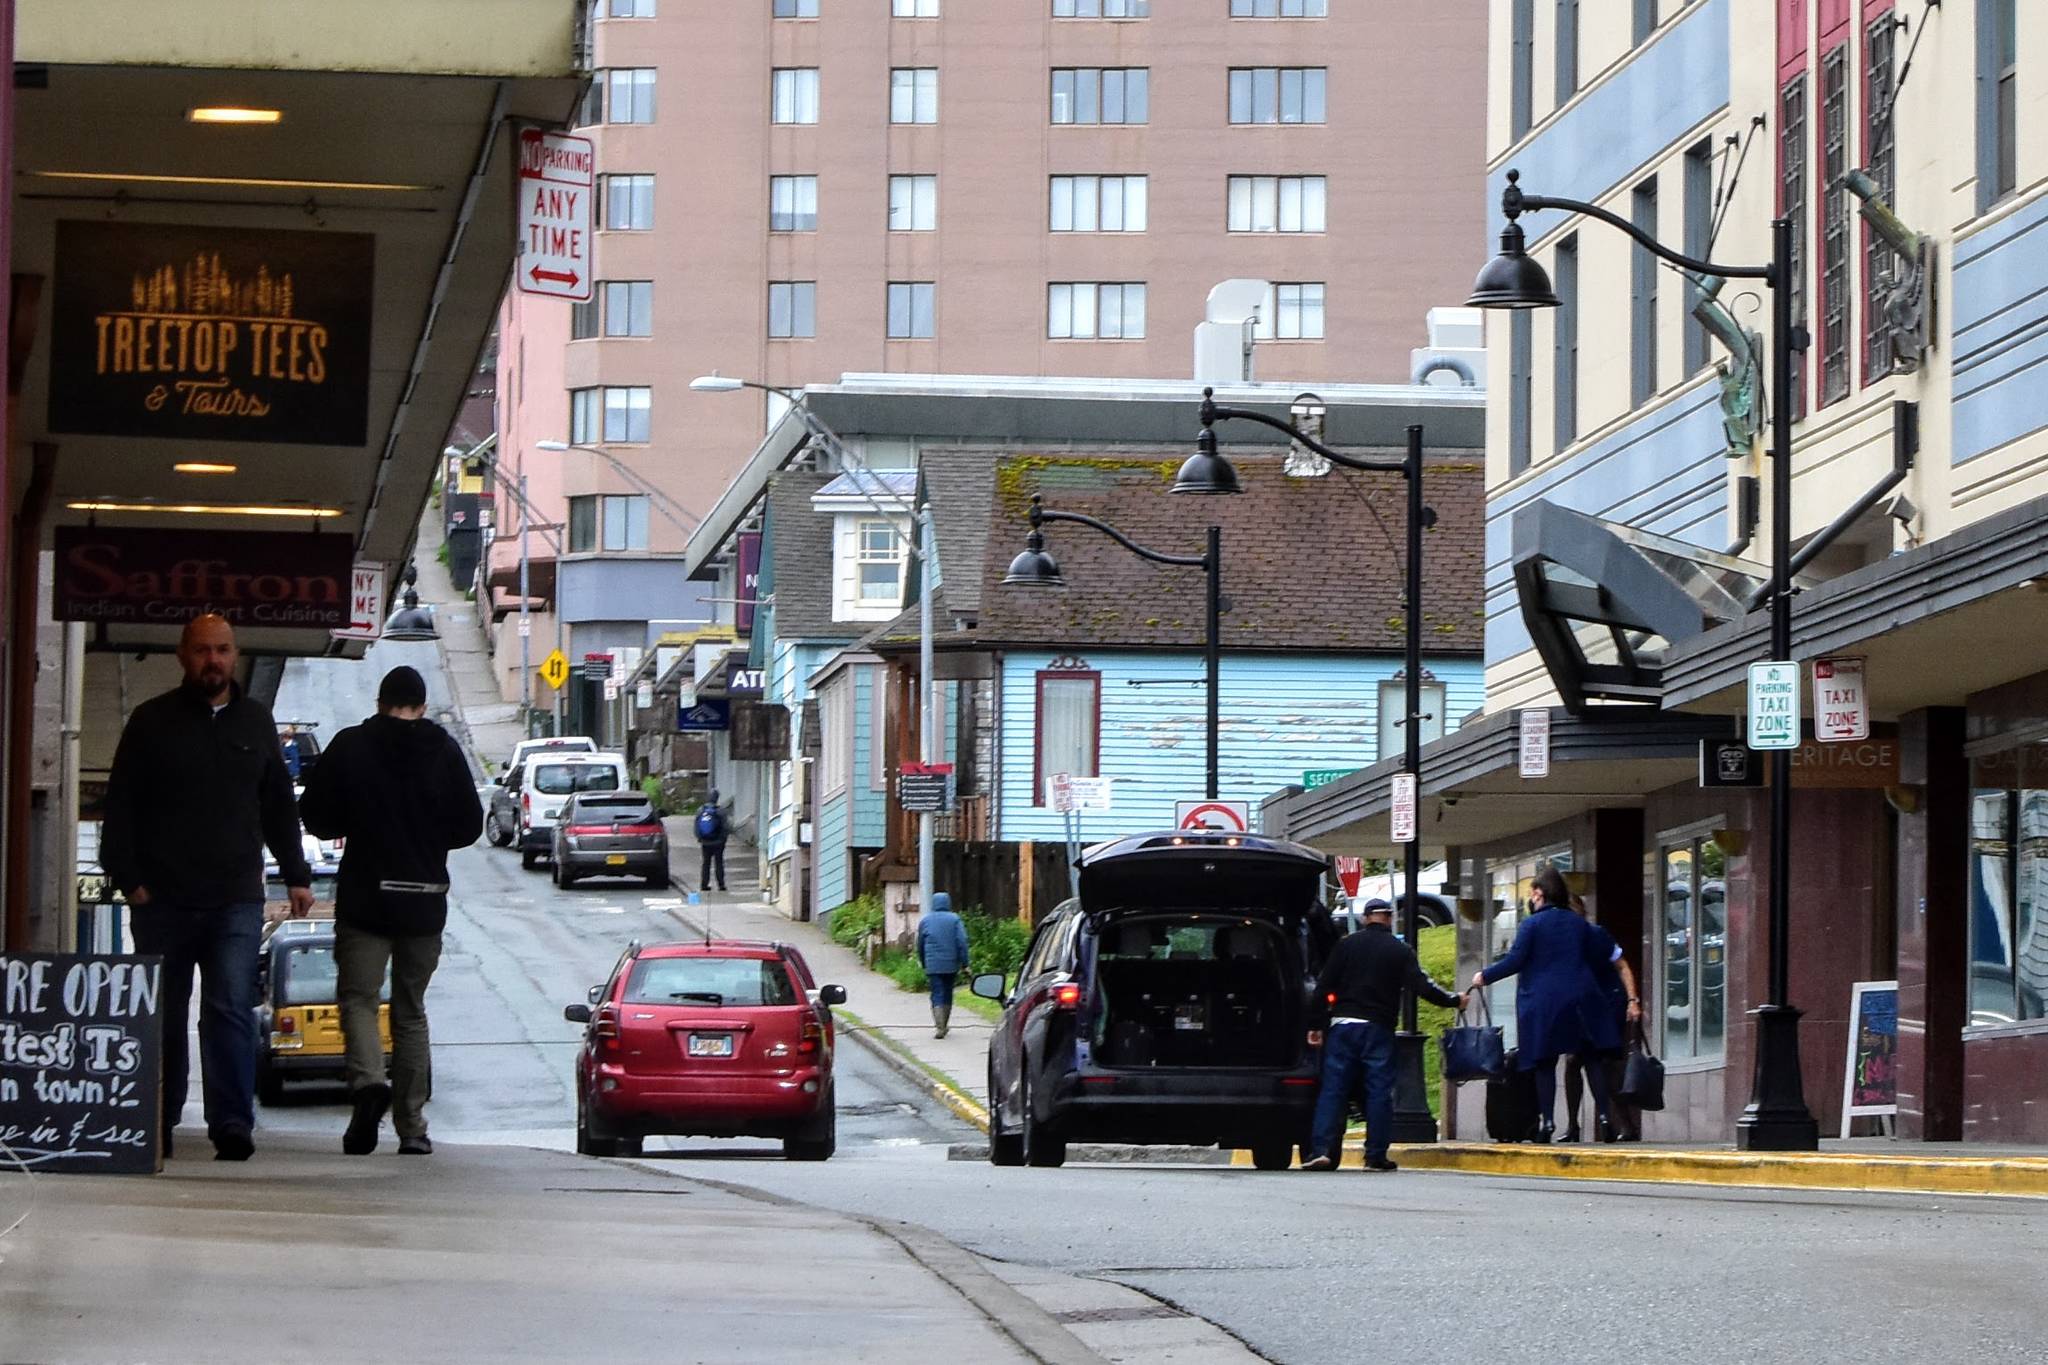 Visitors depart from the Baranoff Hotel in downtown Juneau on Thursday, June 3, 2021, just days after the typically year-round hotel reopened its doors after closing for the COVID-19 pandemic. Travelers are returning, hoteliers say, but many of their rooms remain empty. (Peter Segall / Juneau Empire)